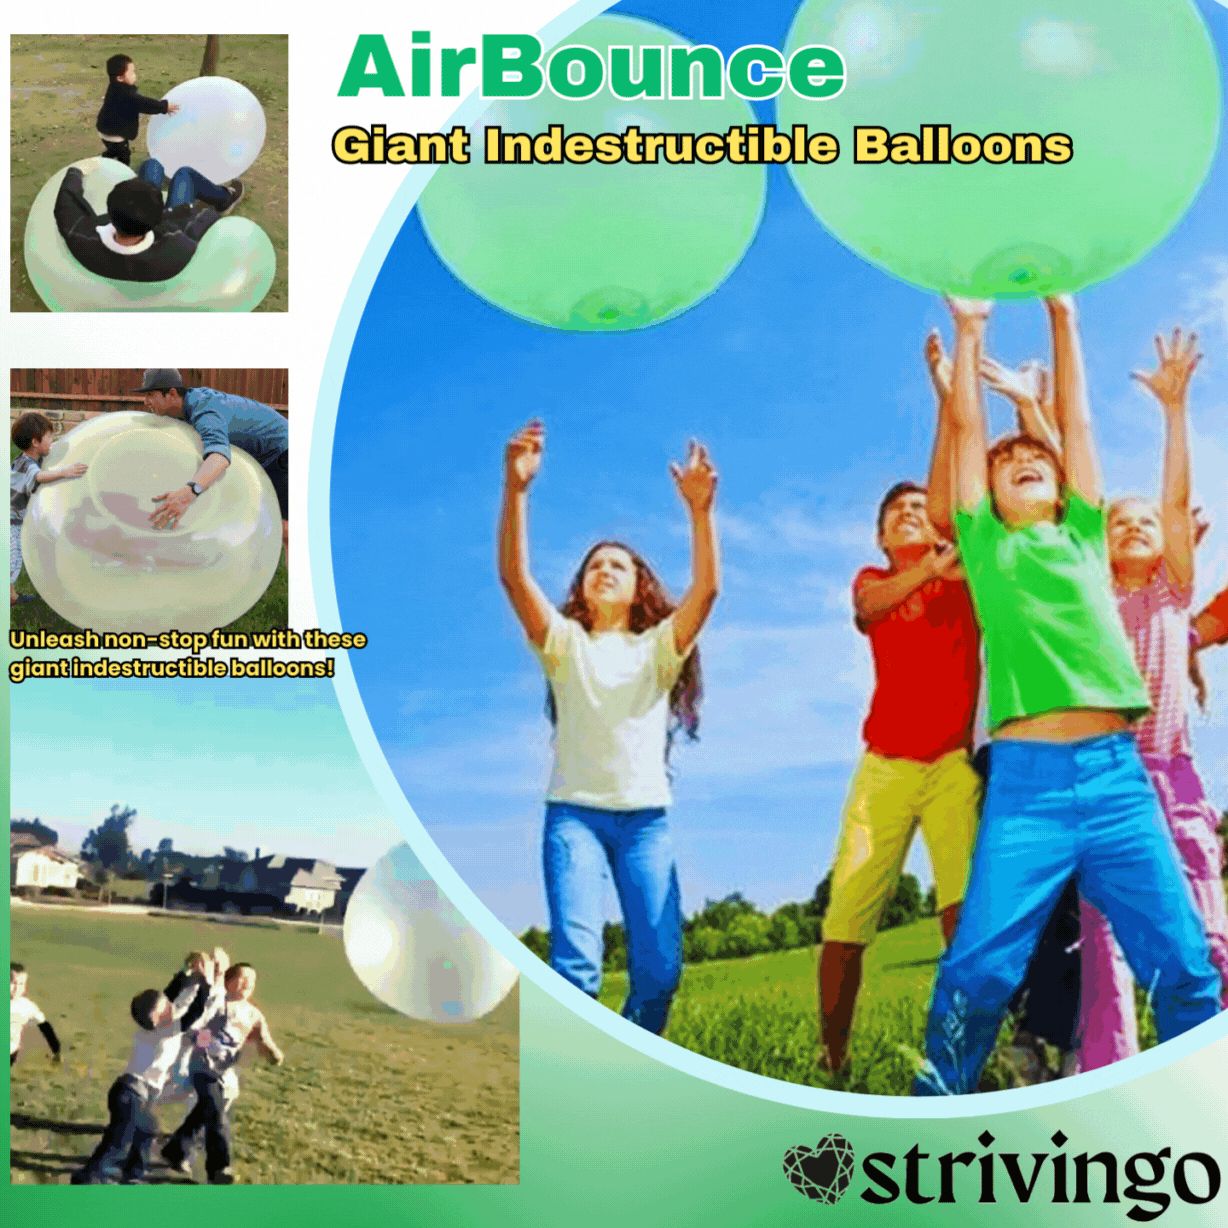 AirBounce™ Giant Indestructible Balloons